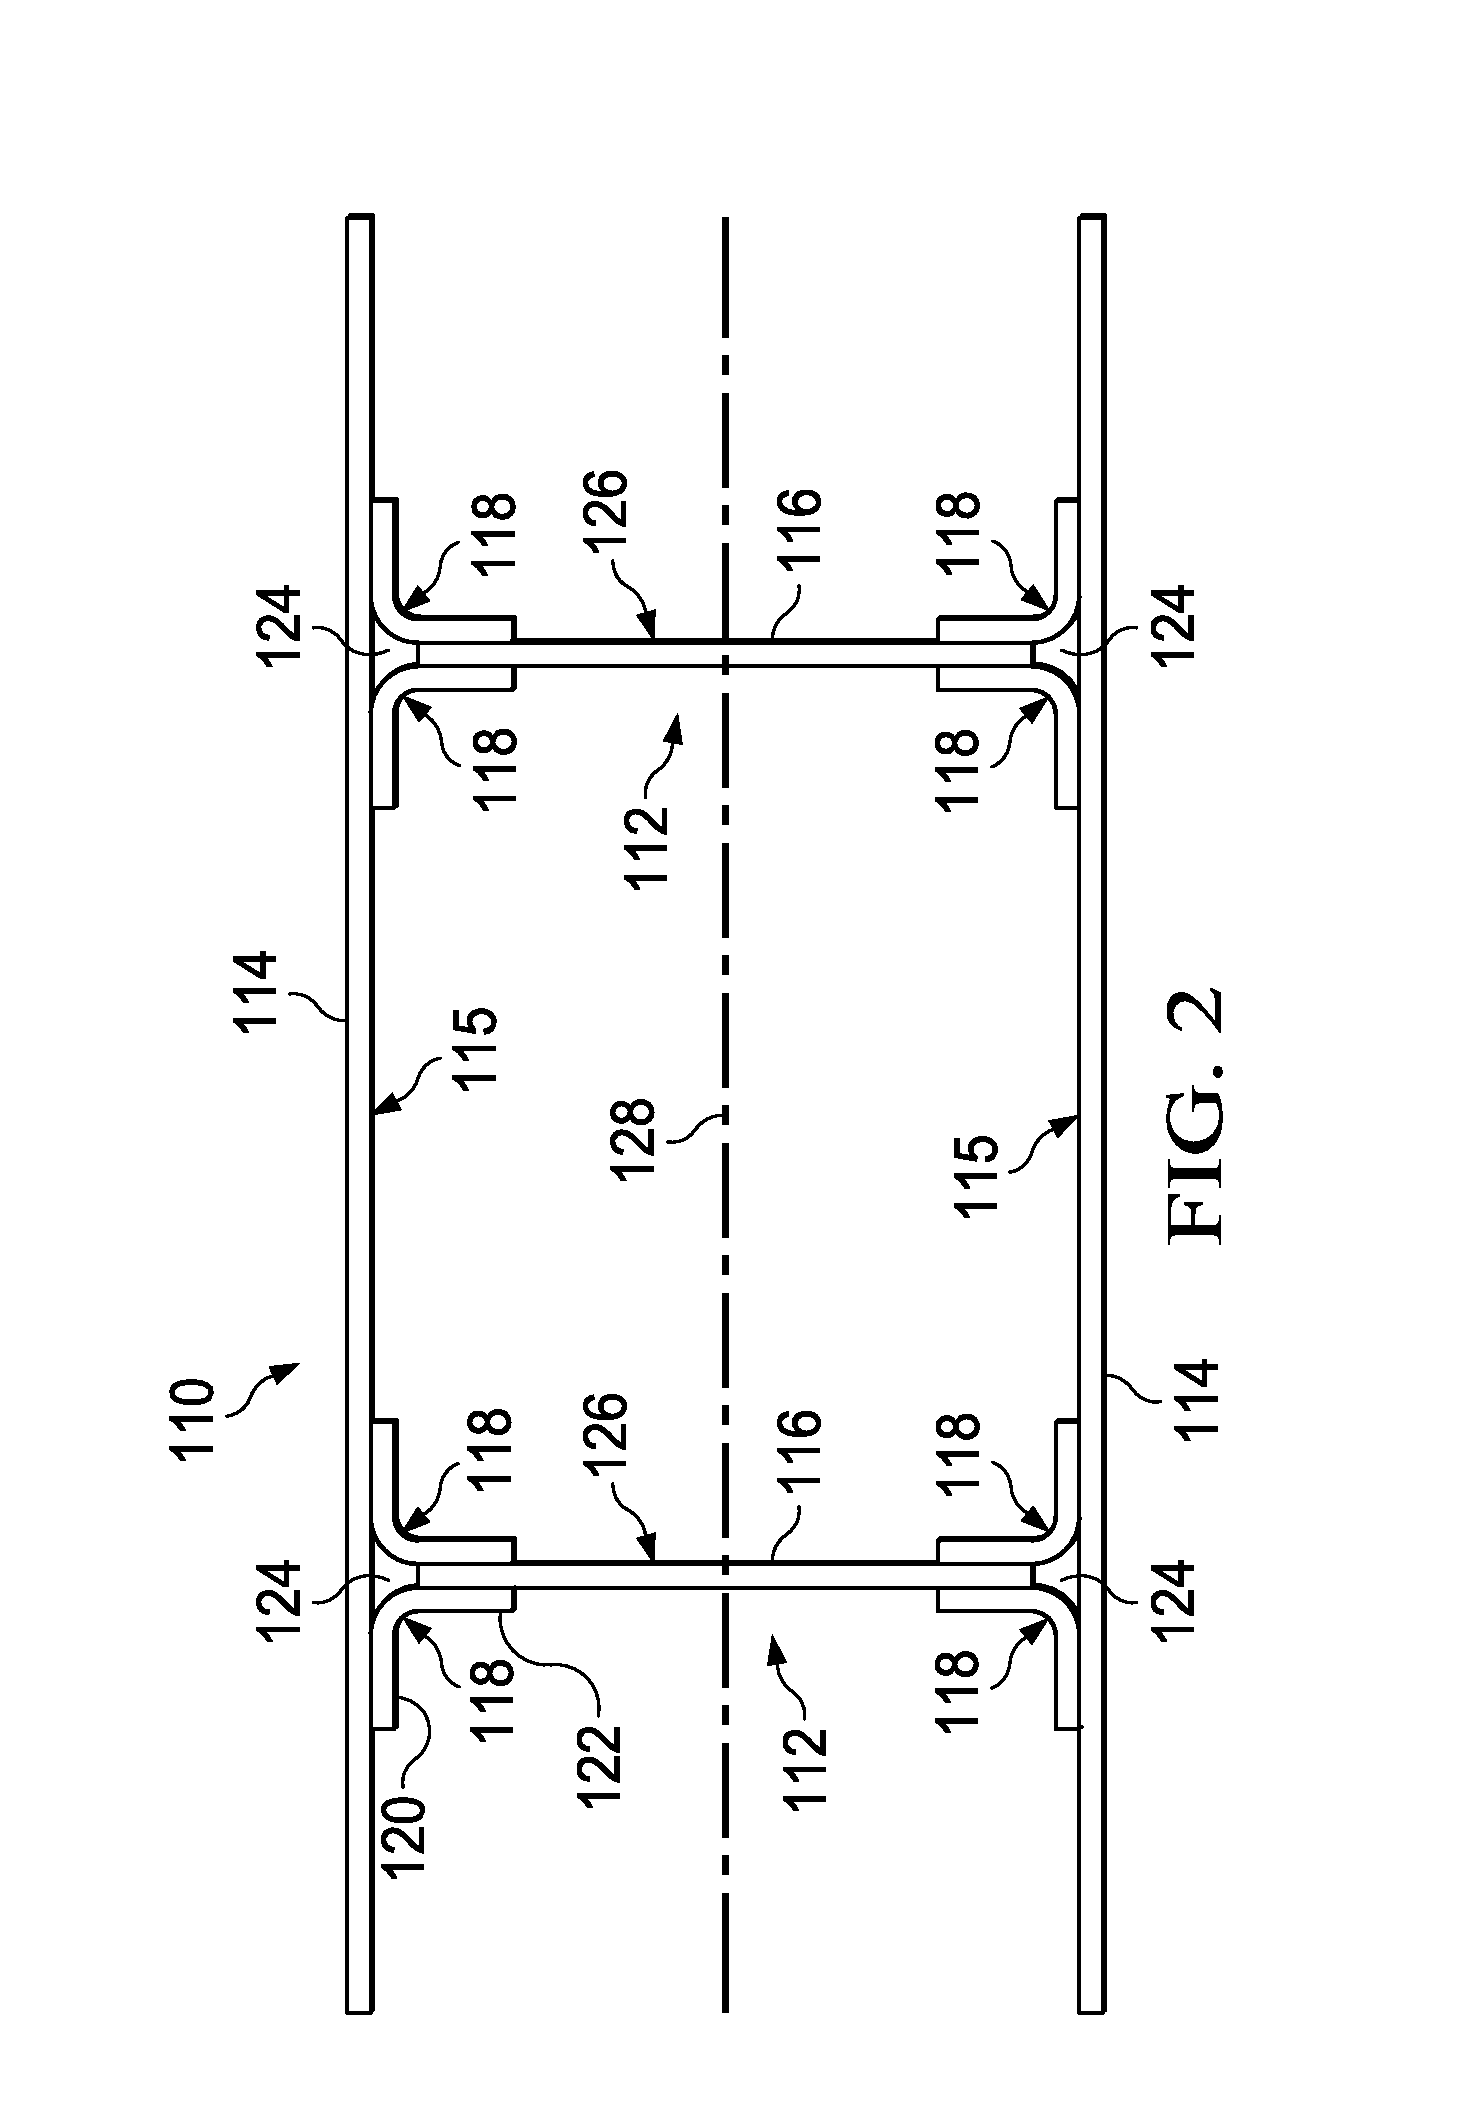 Method and Apparatus for Fabricating Large Scale Integrated Airfoils